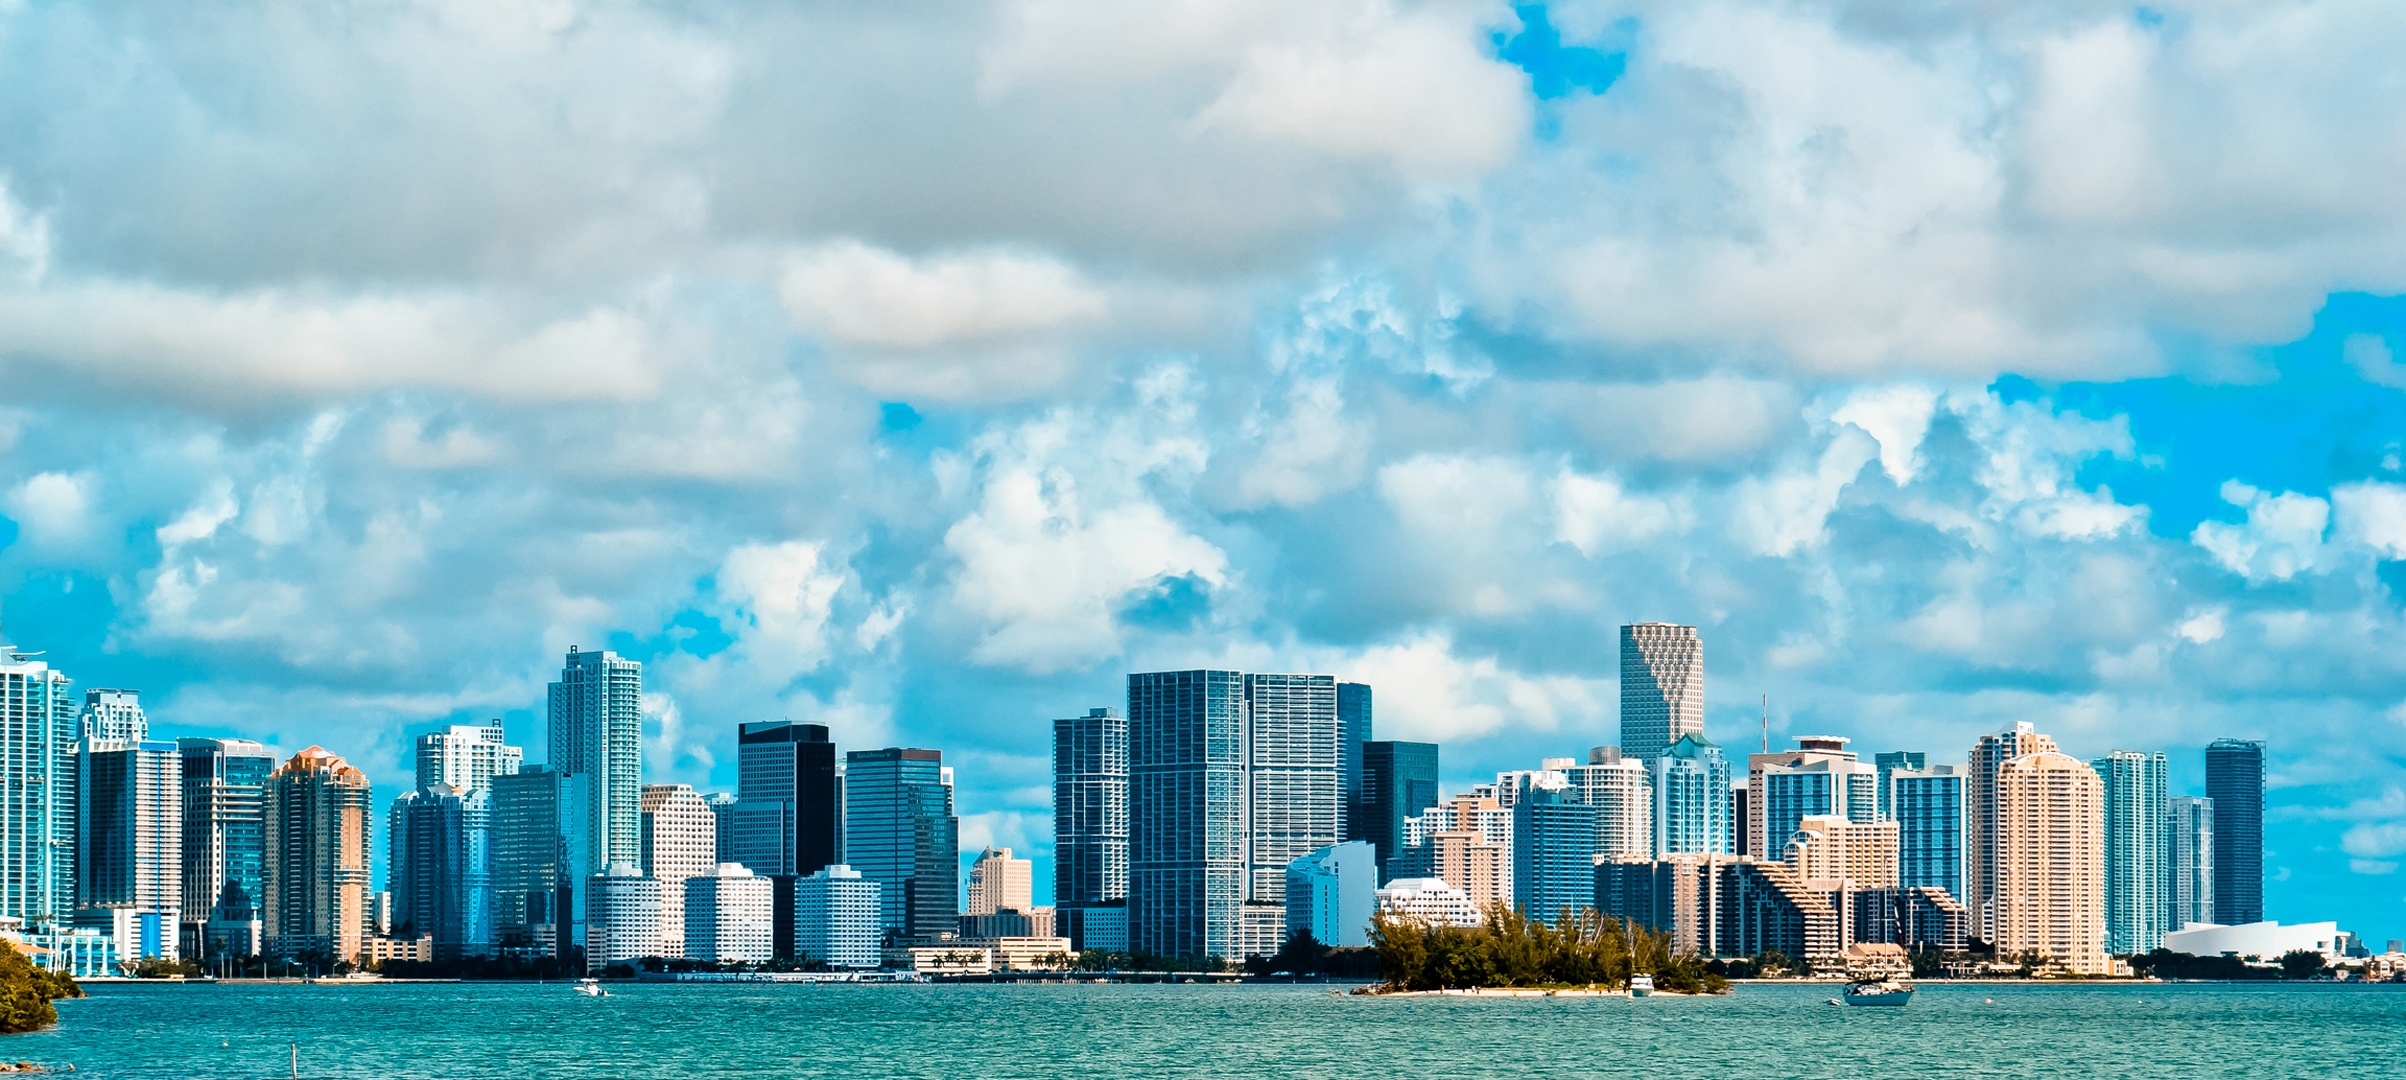 building, high rise buildings, miami, cities, sky, clouds, usa, united states, america, florida, miami beach